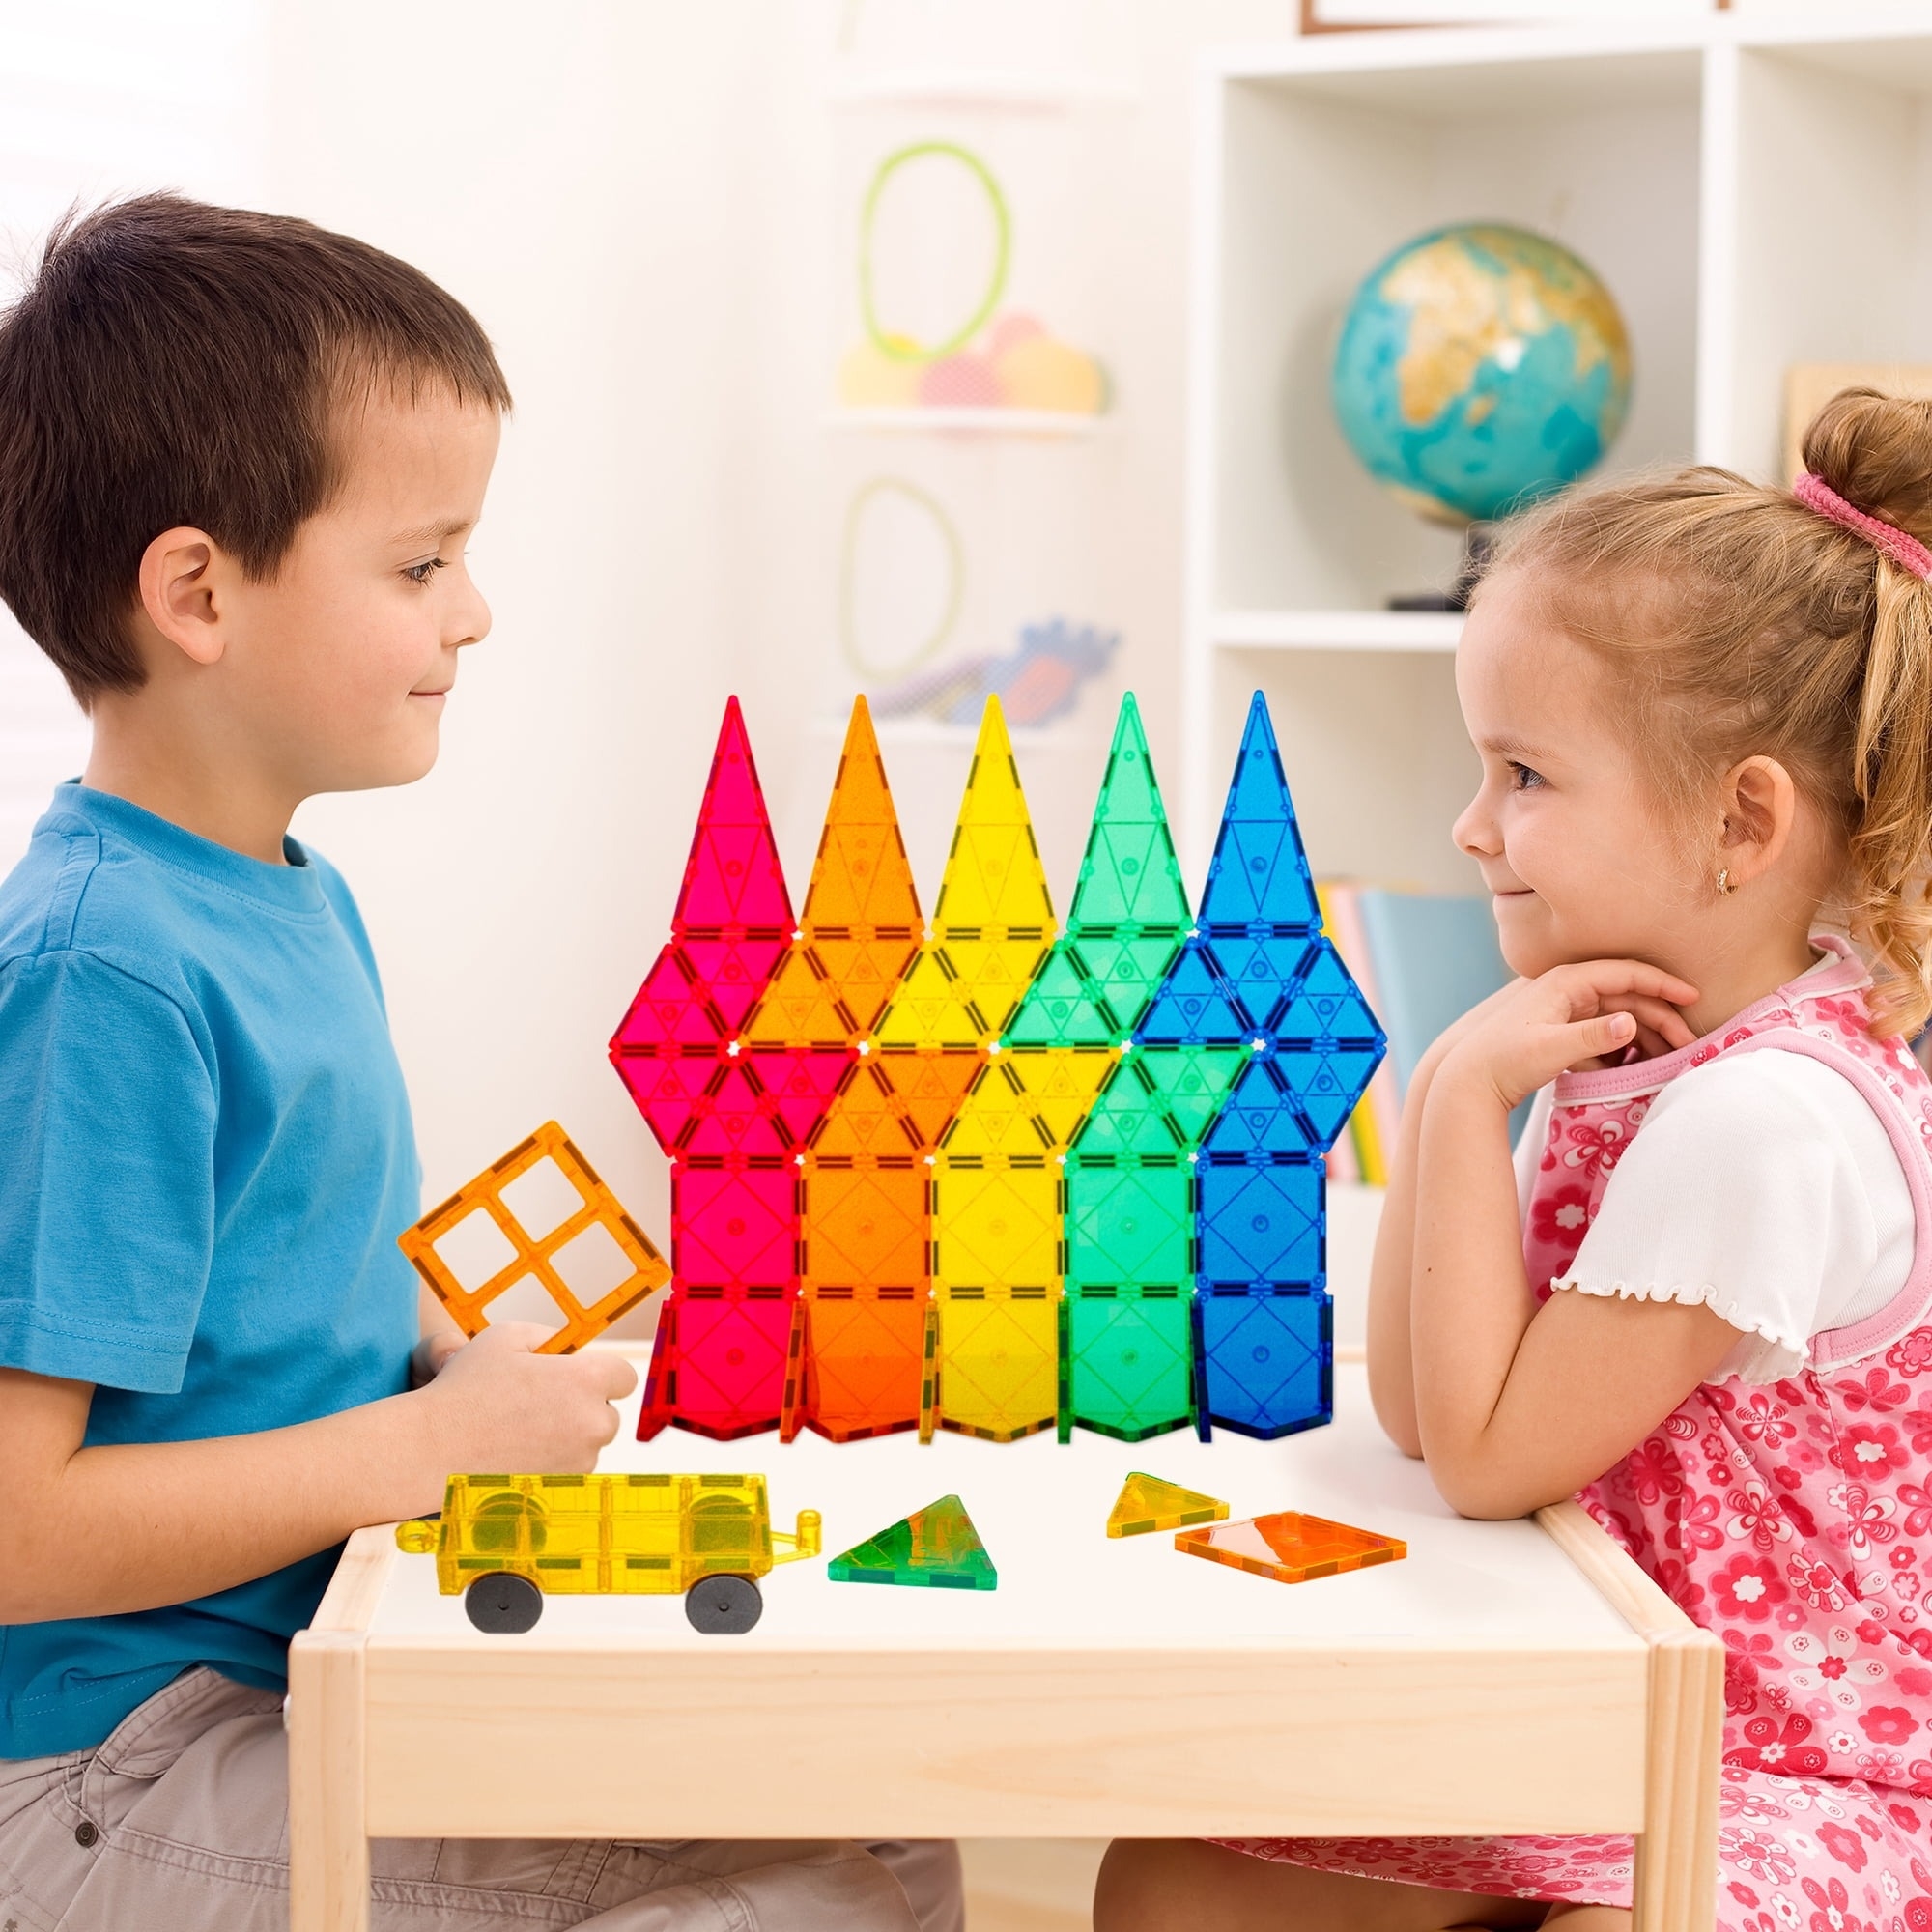 Kids play with magnetic tiles